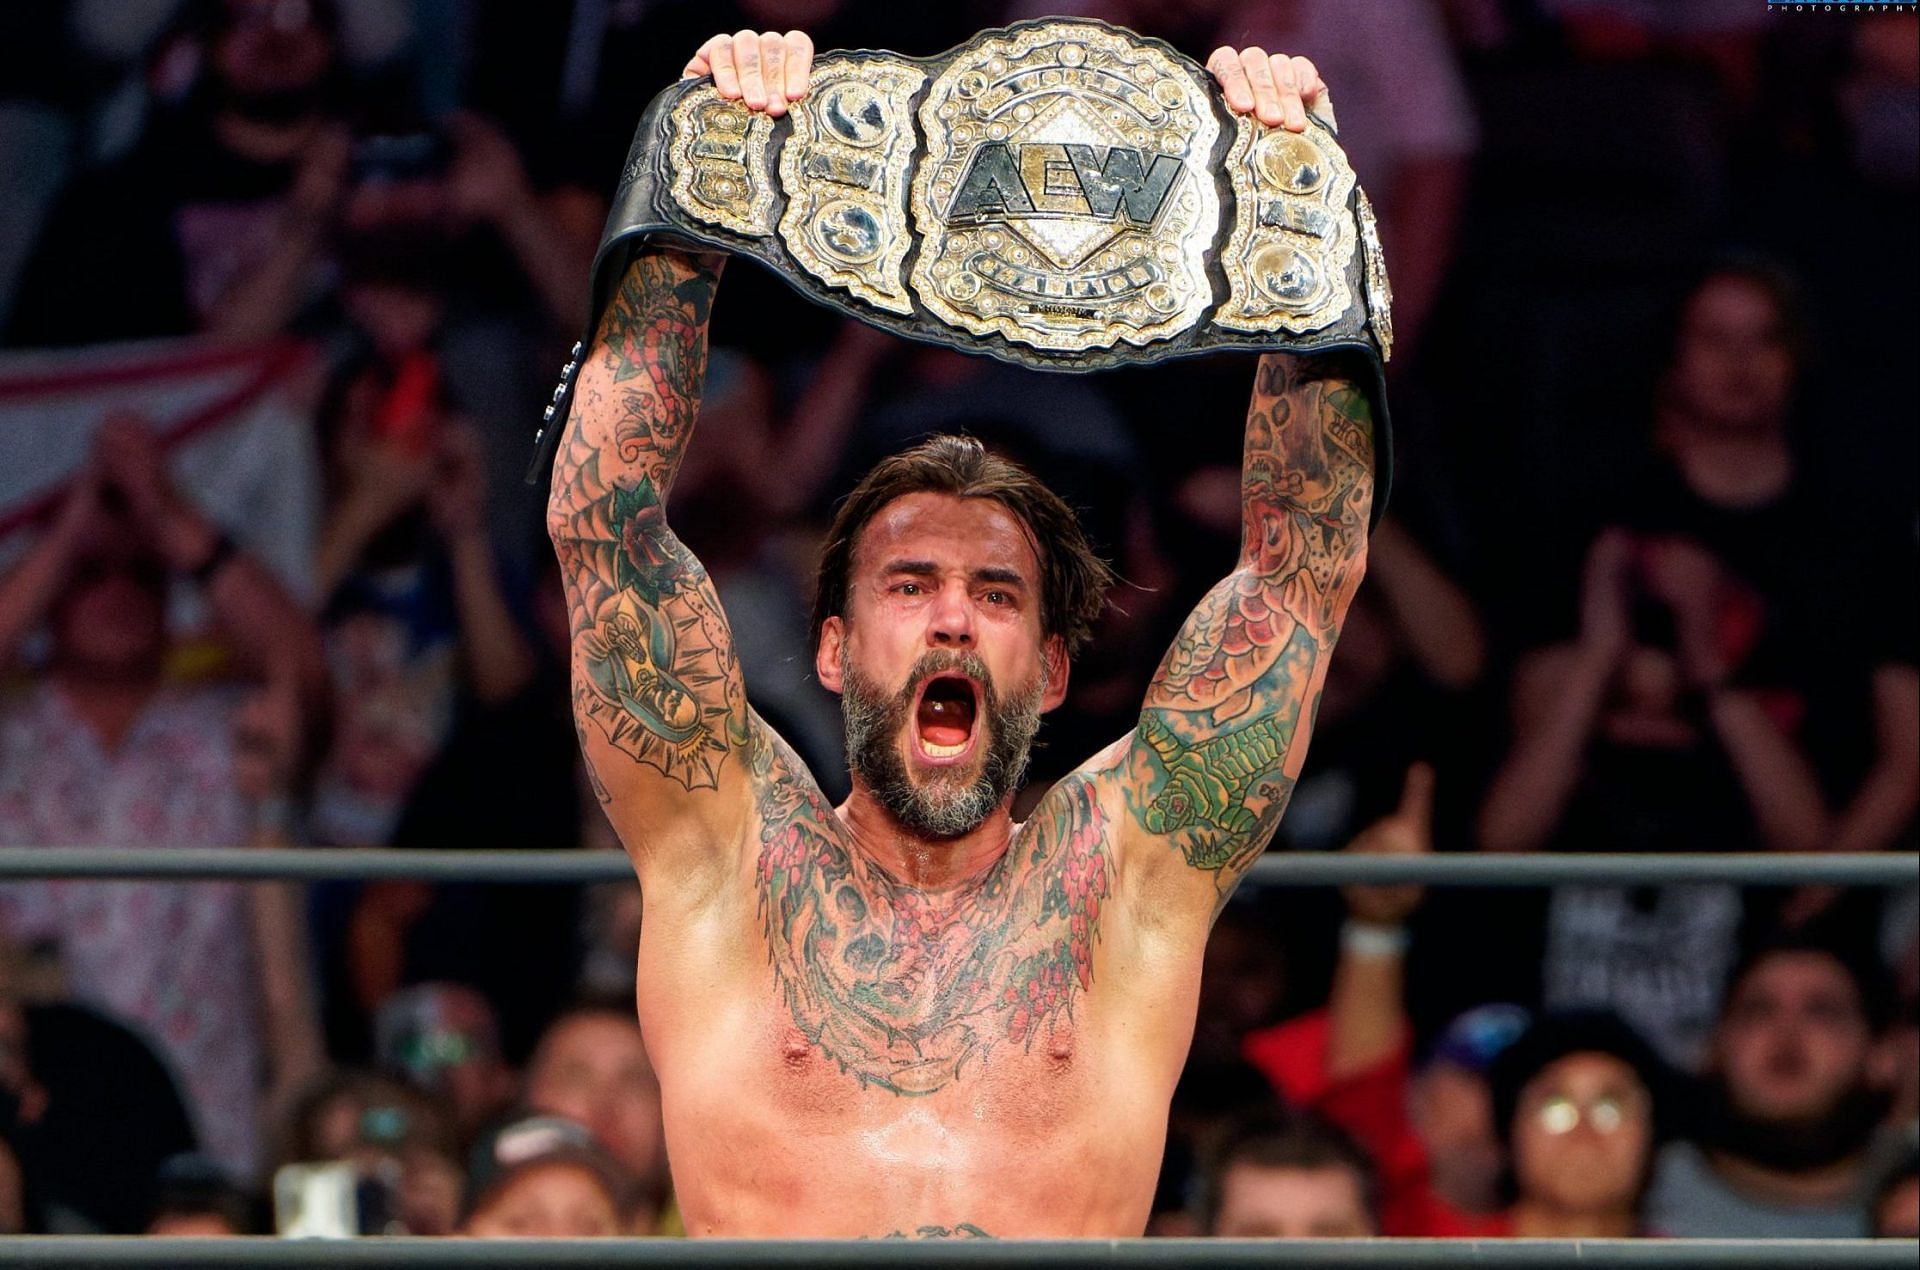 Could the unthinkable happen with Punk making a return to WWE?